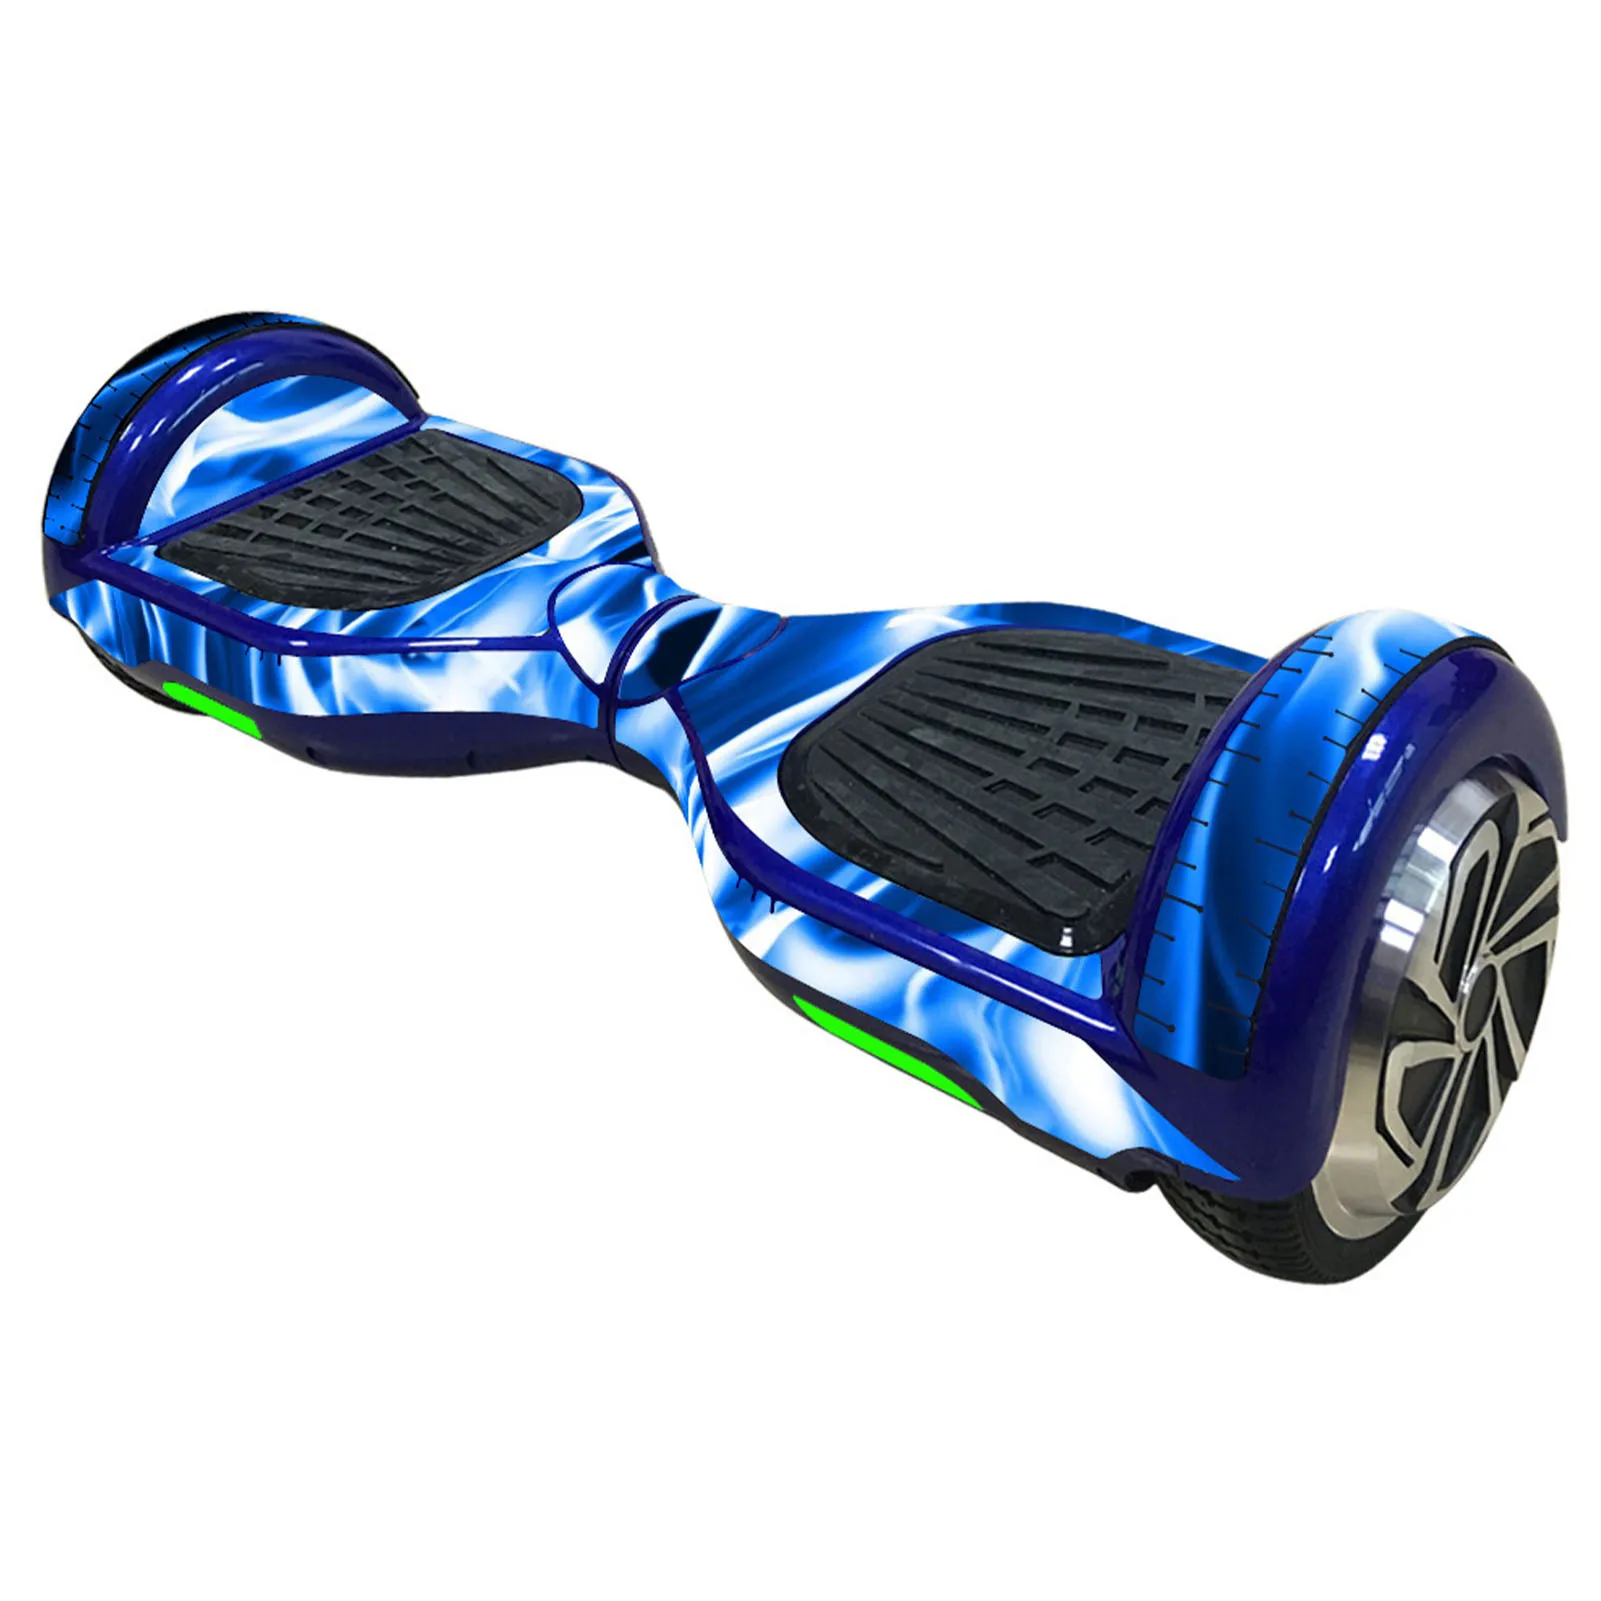 Electric Scooter Drift Self Balancing Standing Scooter Hoverboard Hover Board 6.5 Inch Balance Wheel Hoverboard Skateboard